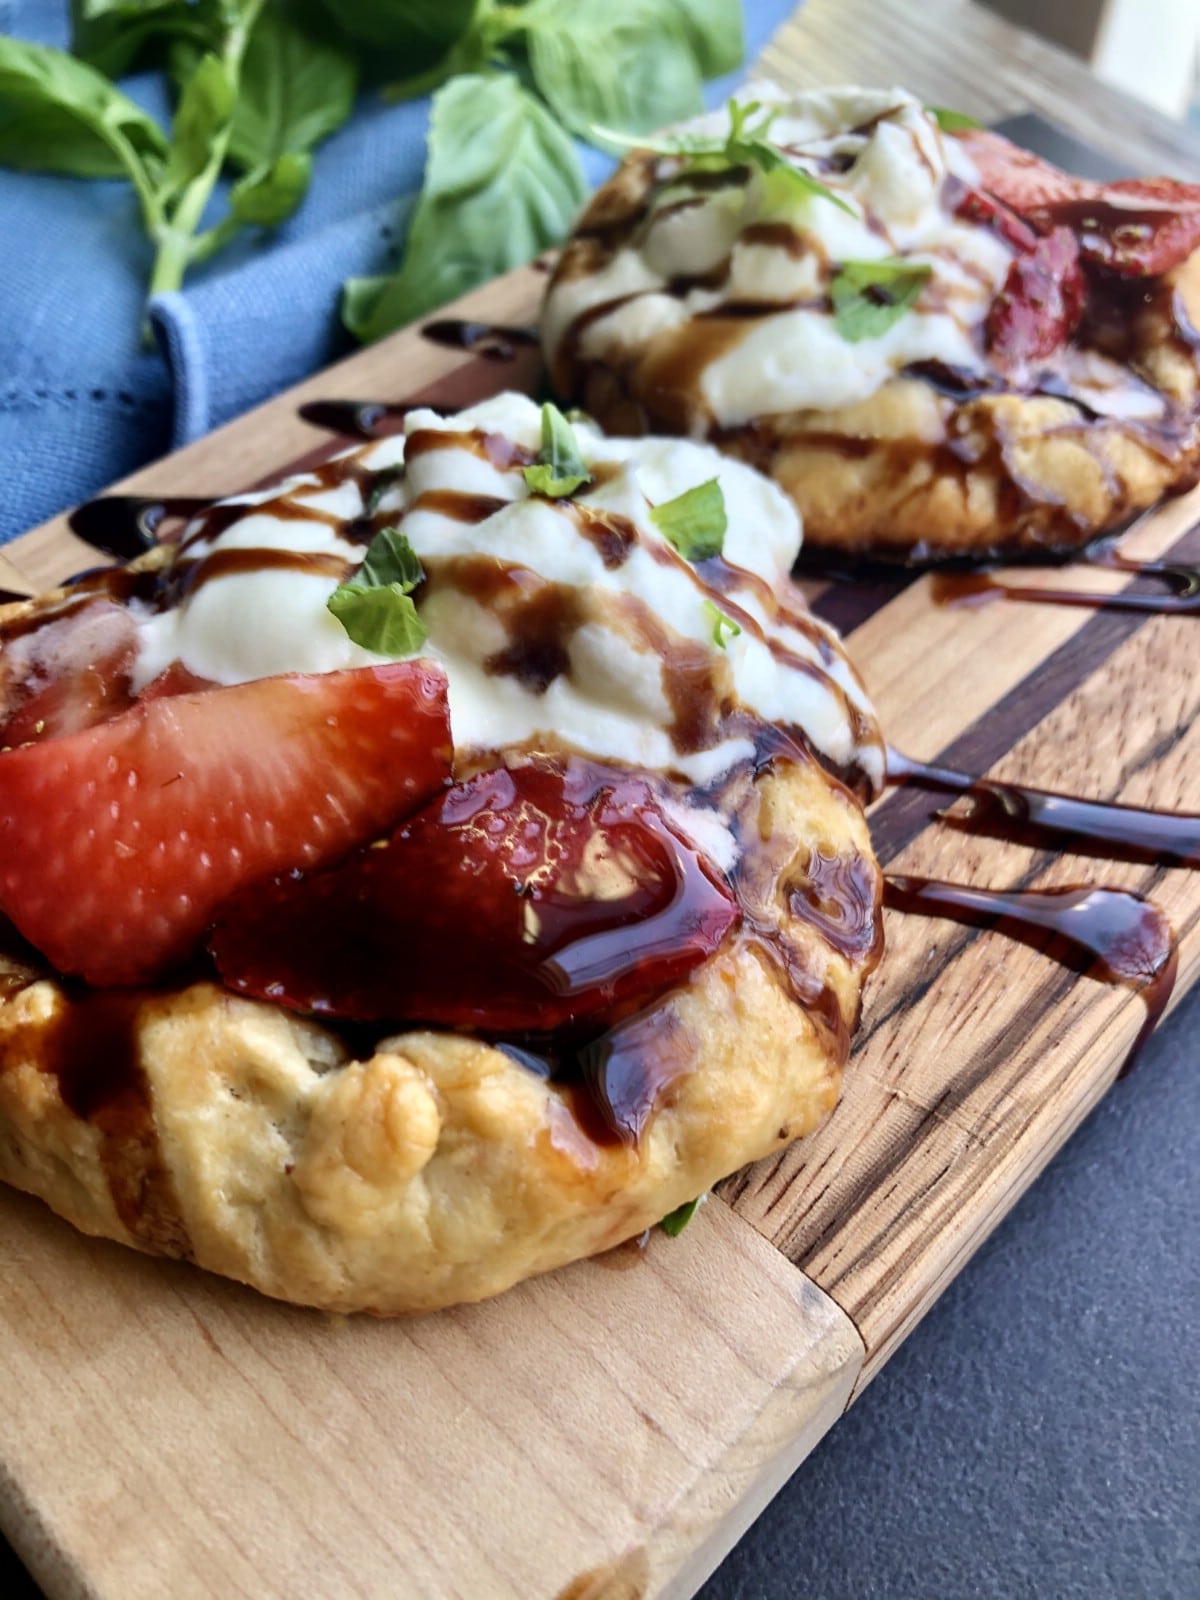 Strawberry balsamic galettes on cutting board